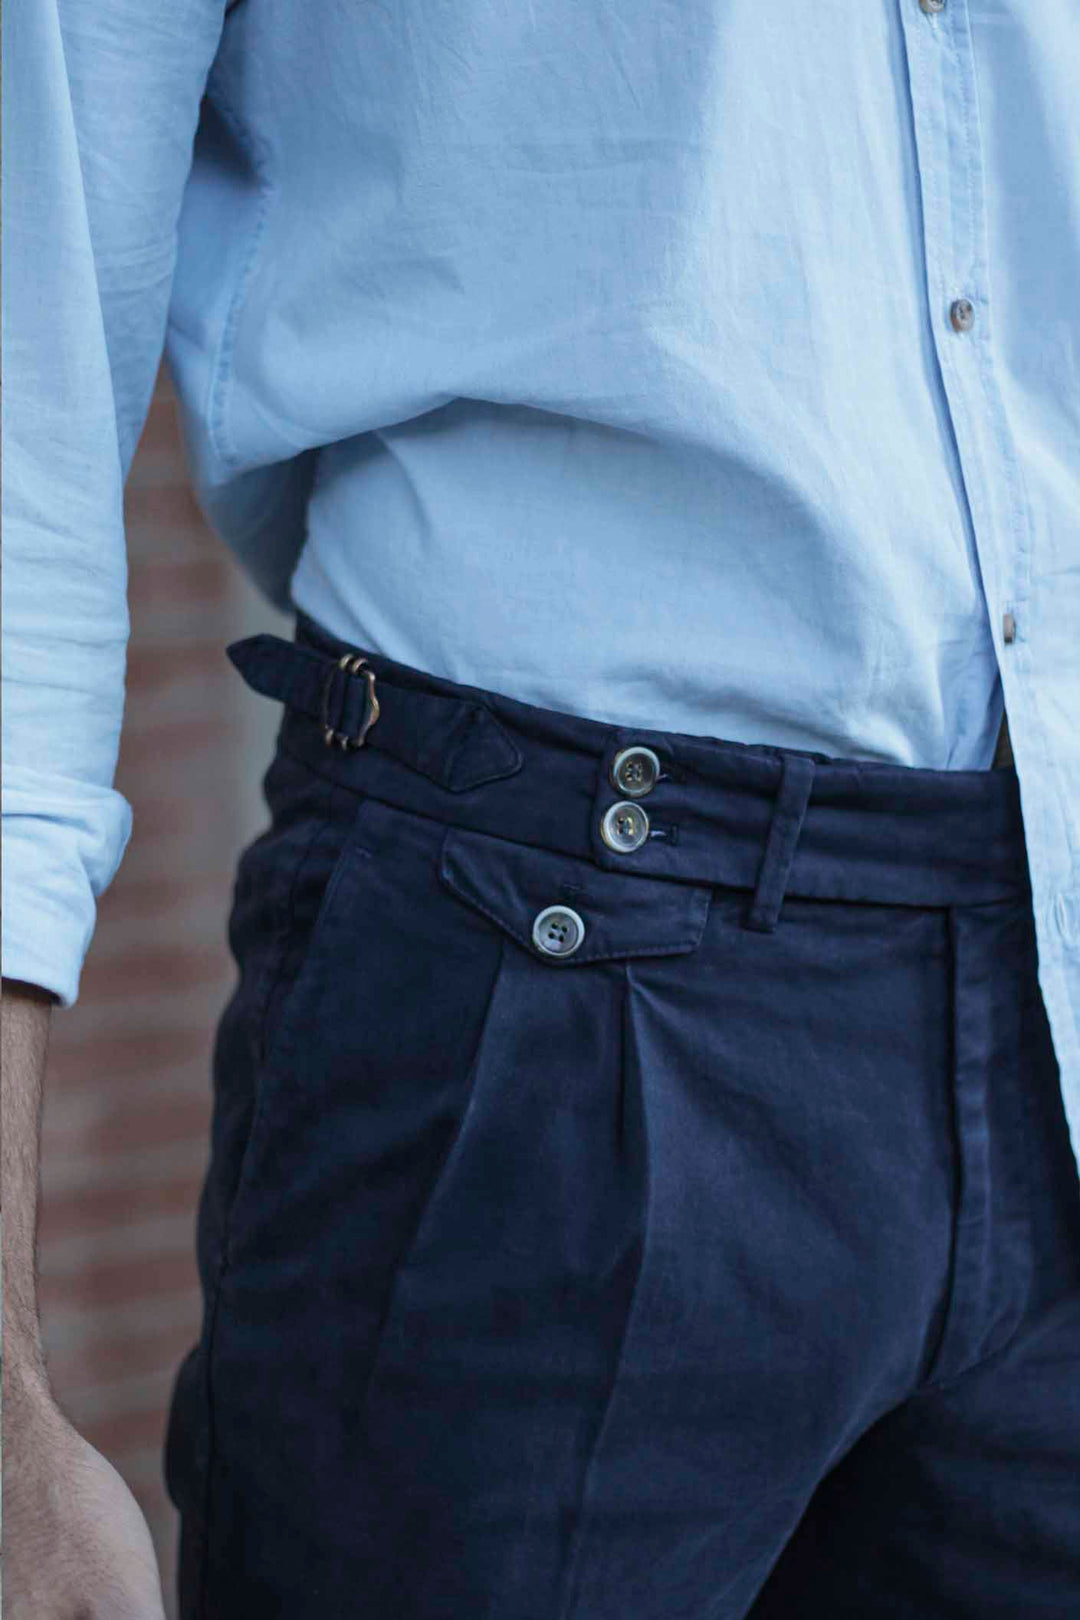 Chino Sartorial Twill Navy Blue Double Front Pinch and Belts